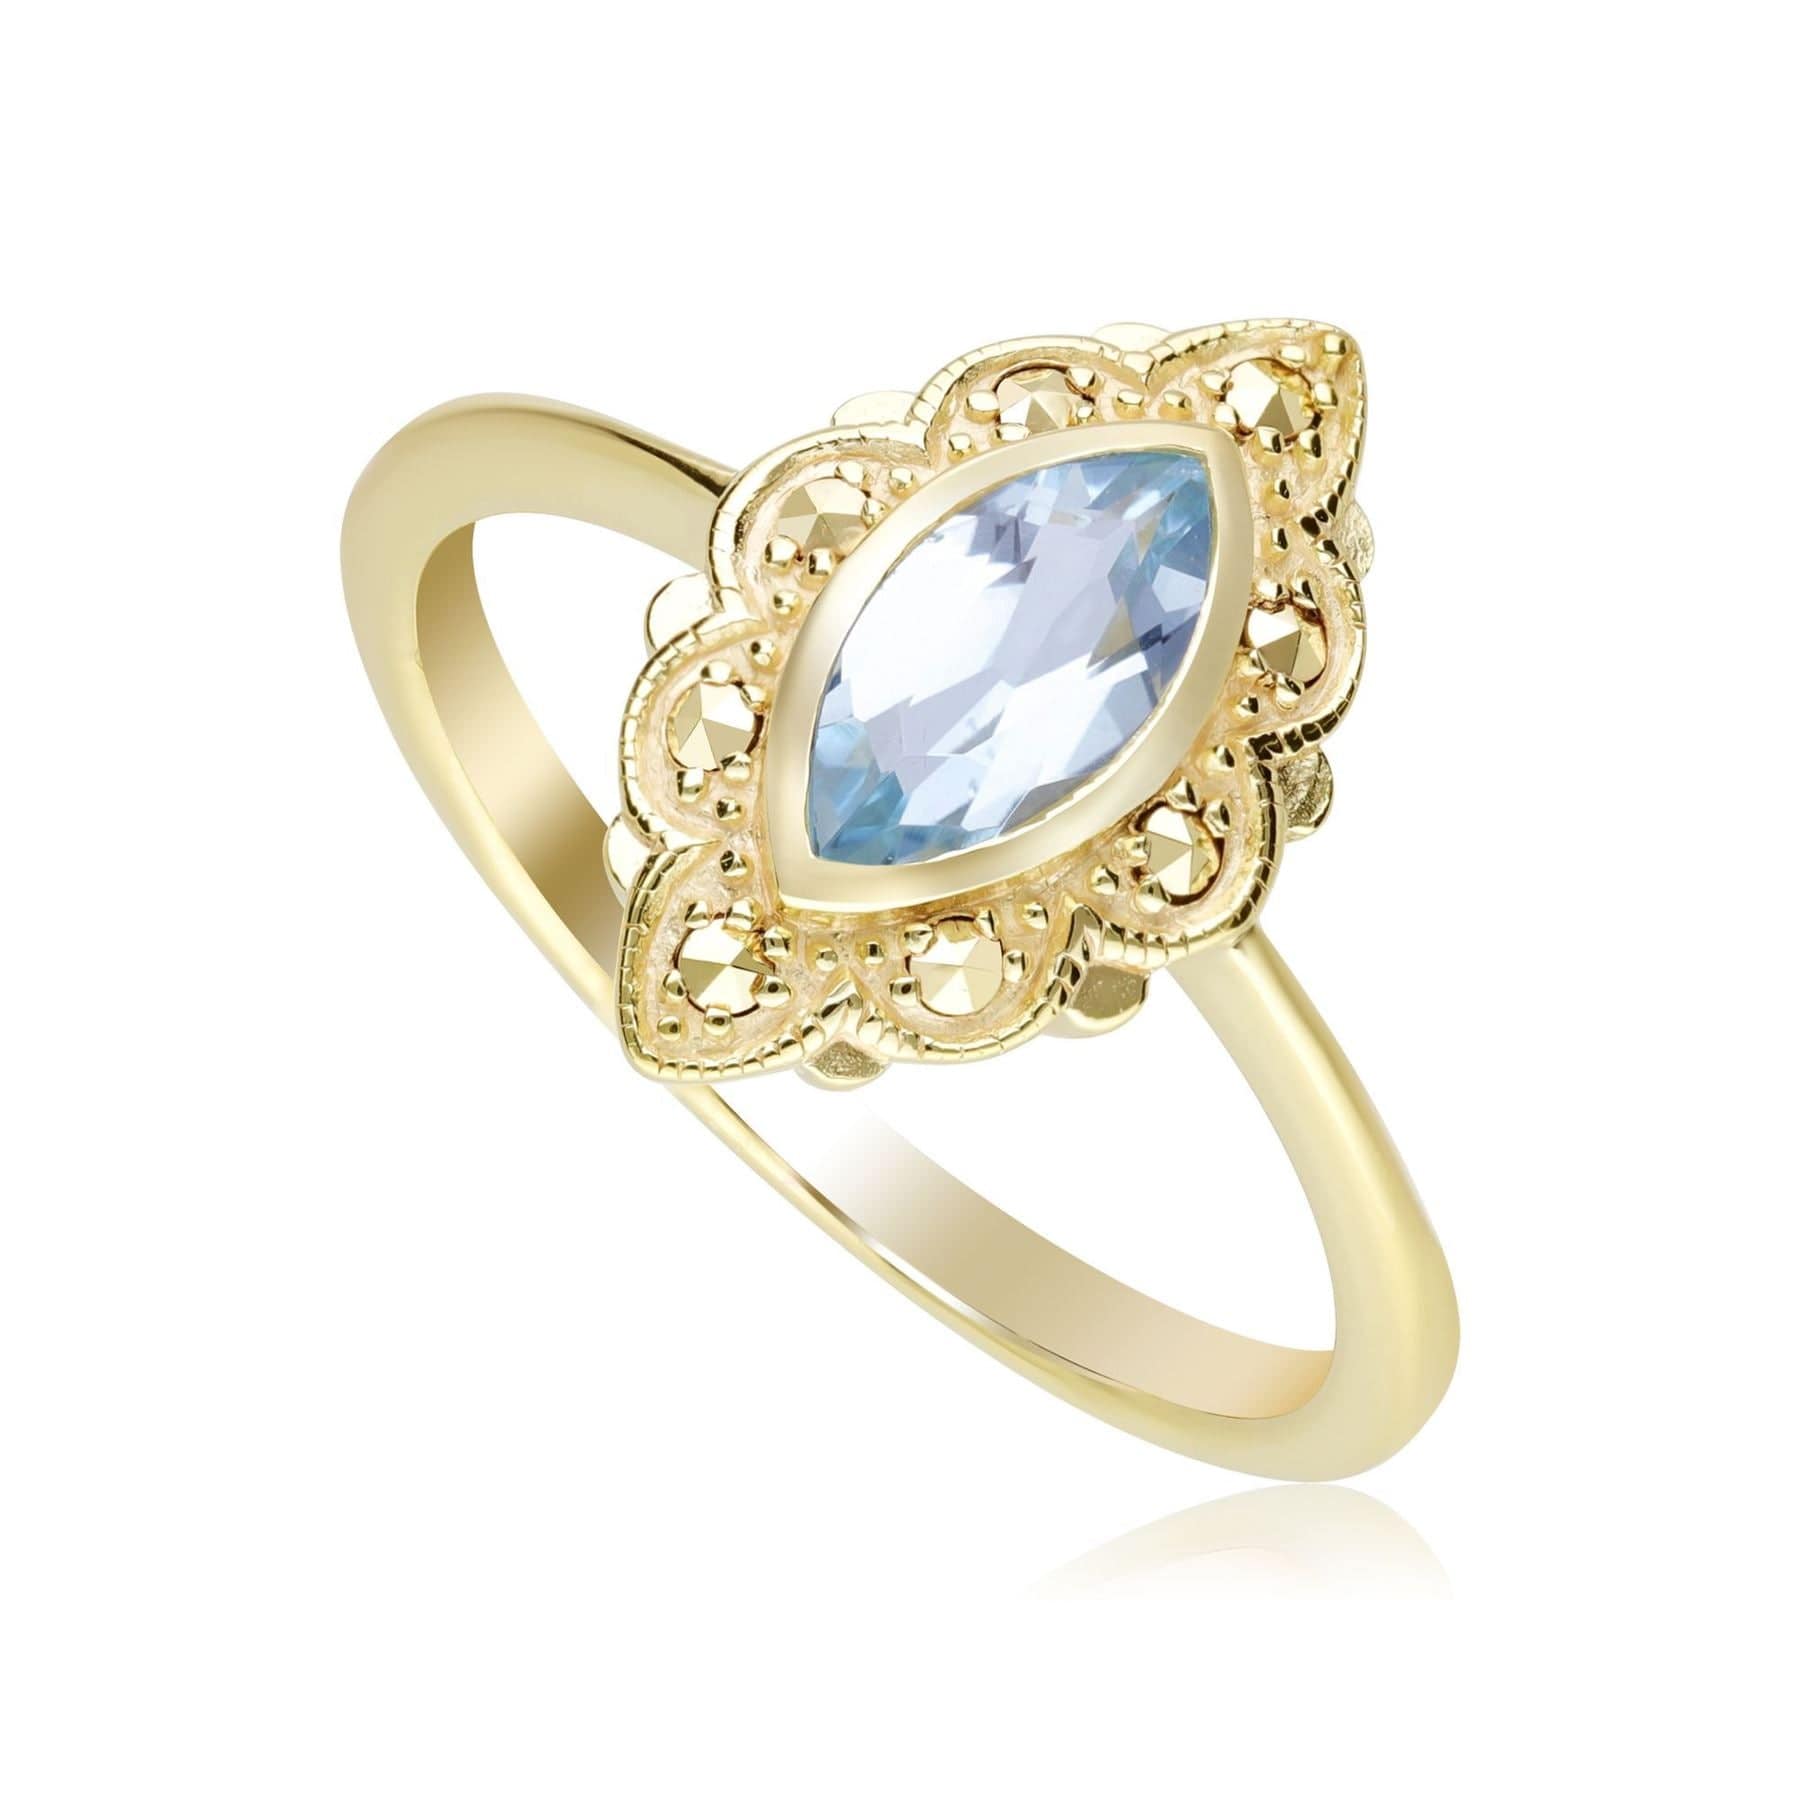 234R043601925 Art Nouveau Inspired Marquise Blue Topaz & Marcasite Ring in 18ct Gold Plated Silver 1